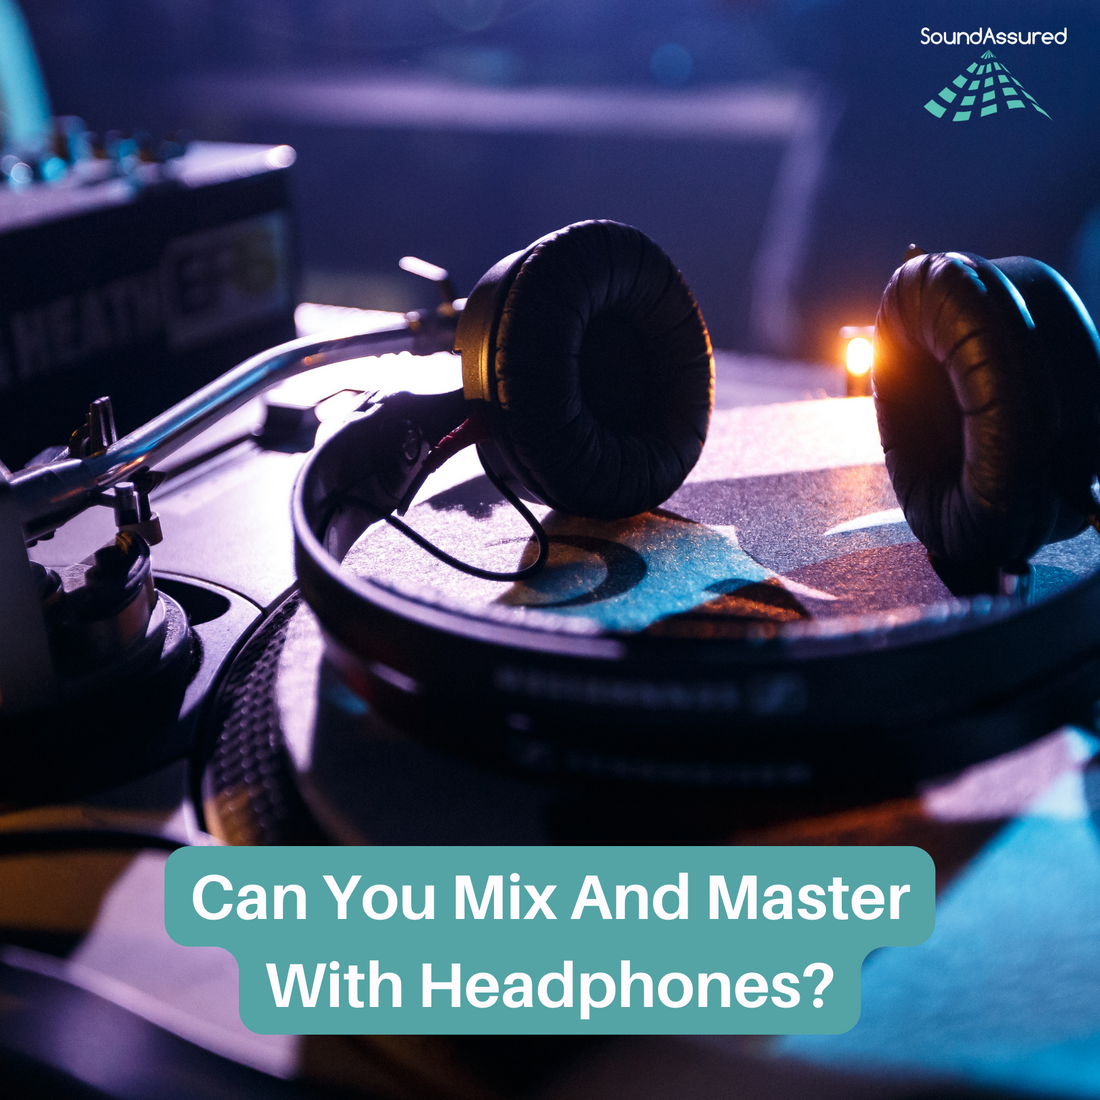 Can You Mix And Master With Headphones?